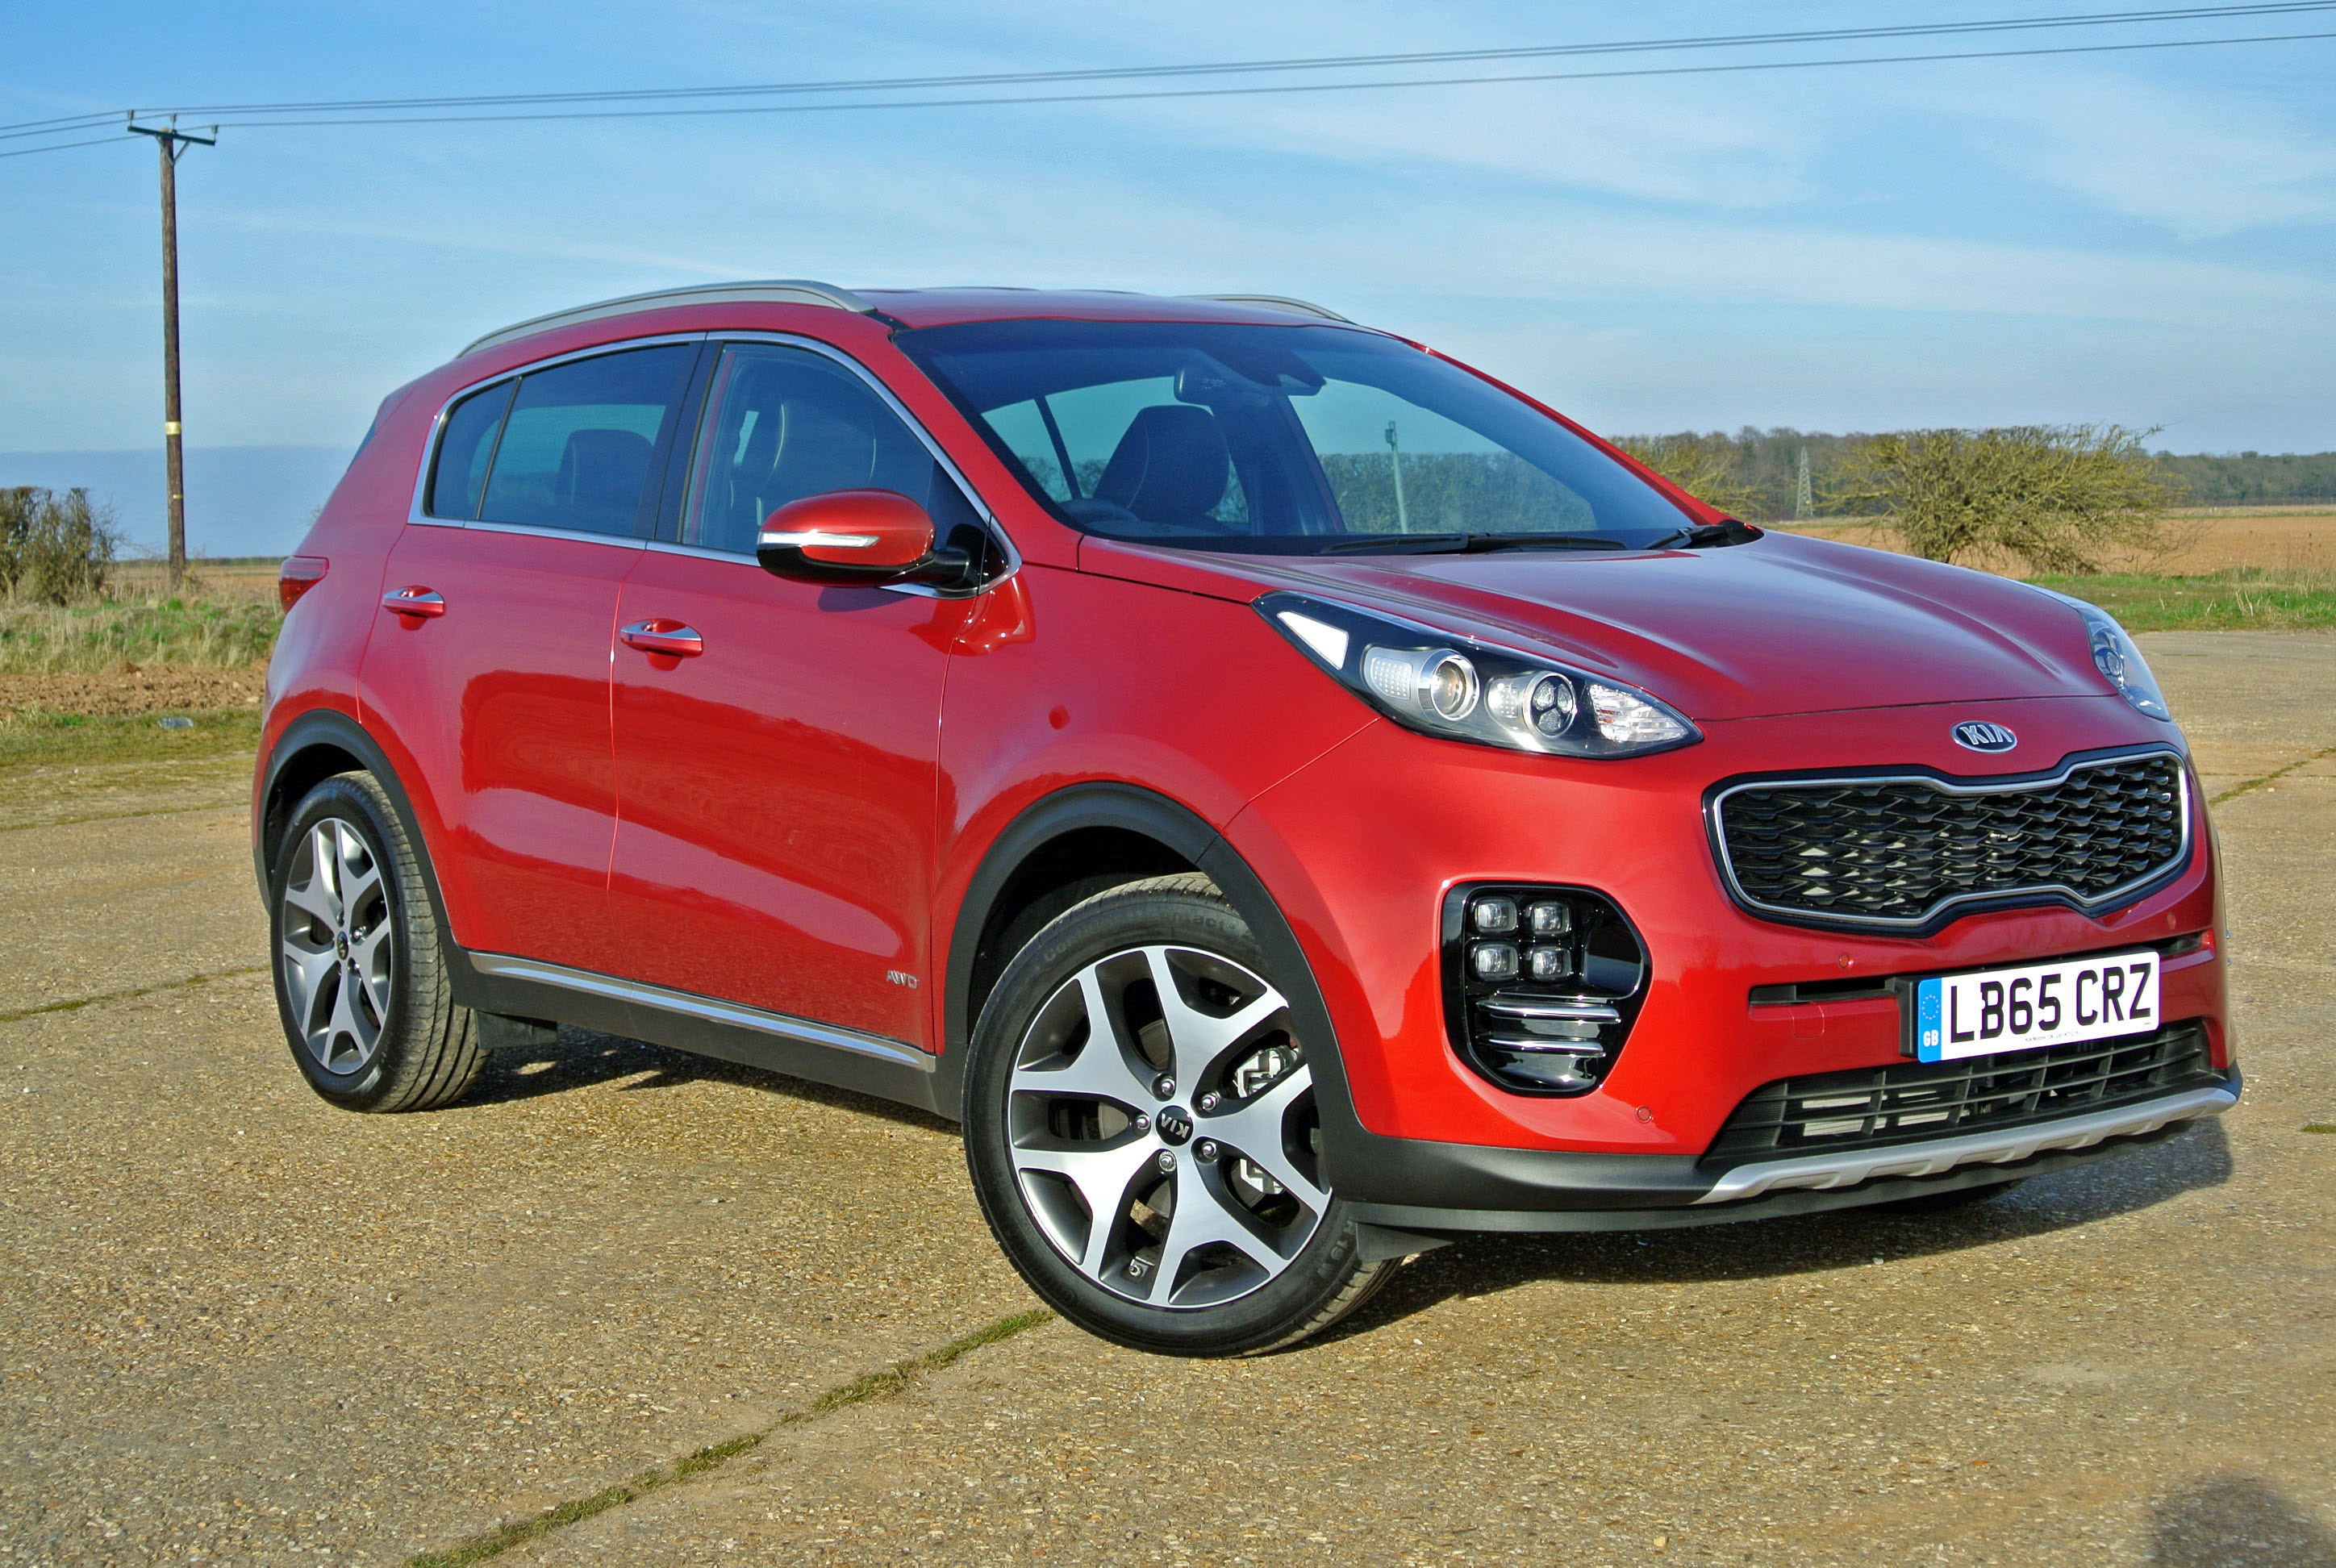 Kia presents the best-ever SUV for mile-eating